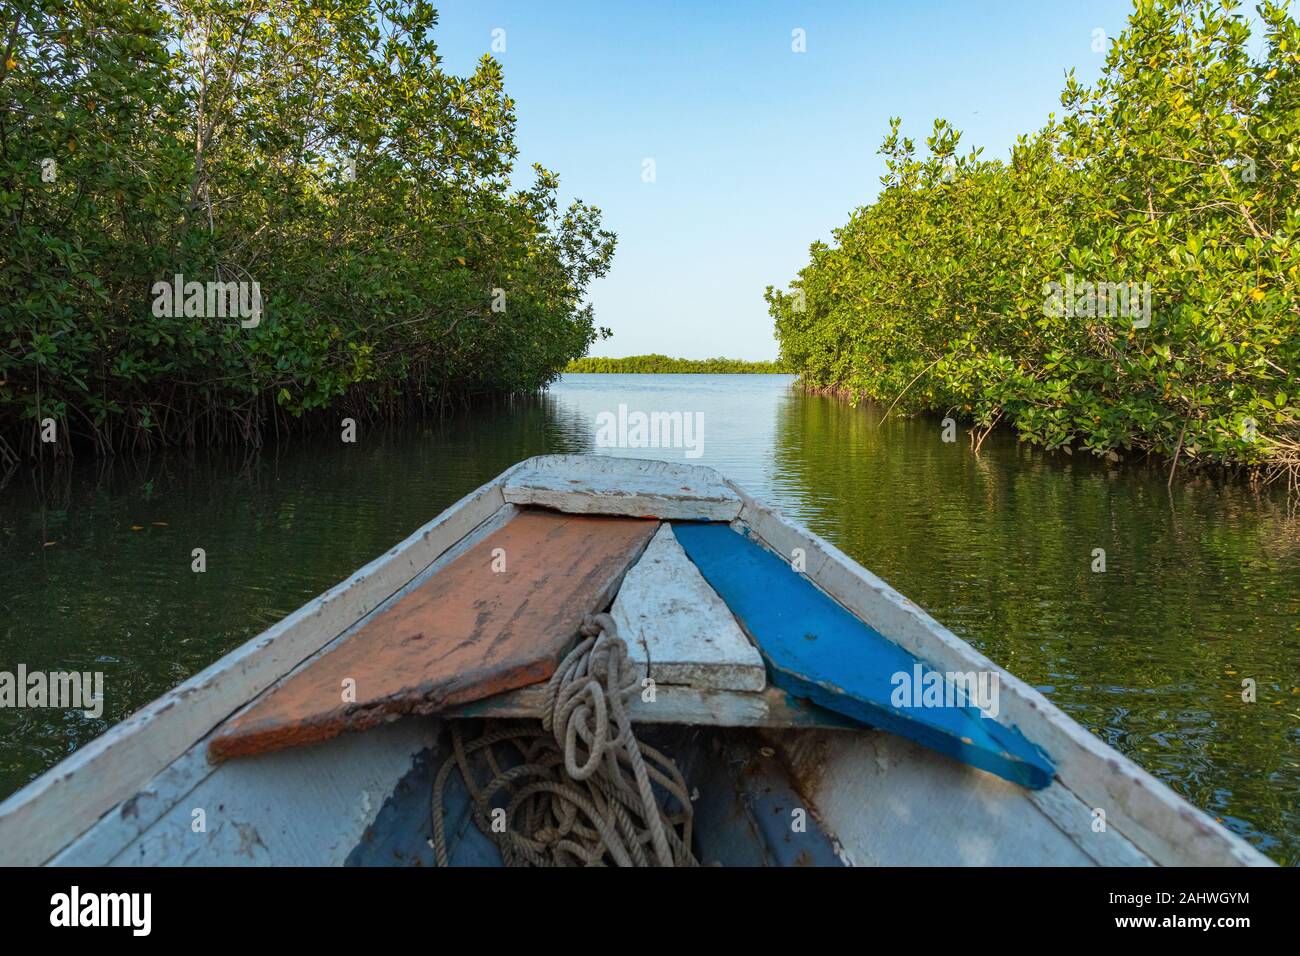 Gambia Mangroven. Traditionelle lange Boot. Green mangrove Bäume im Wald. Gambia. Stockfoto